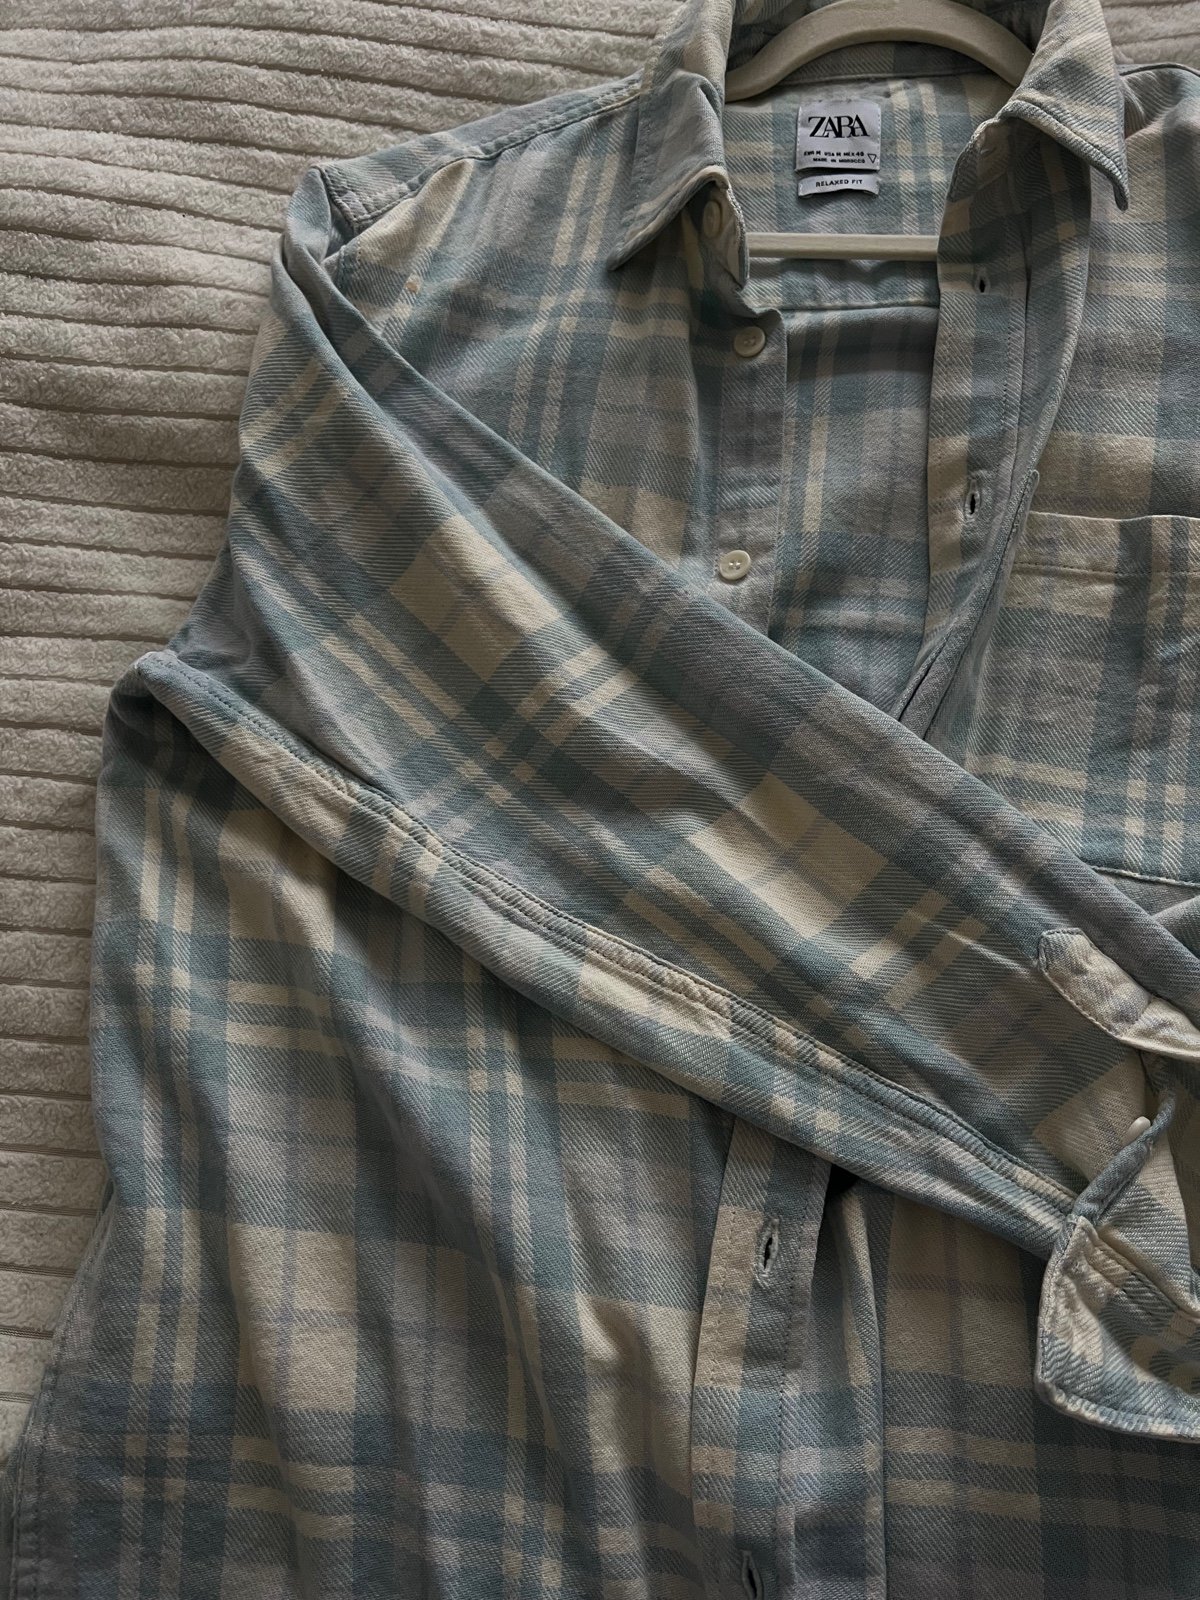 save up to 70% Oversized blue and white plaid shirt KMPBXOh9H on sale